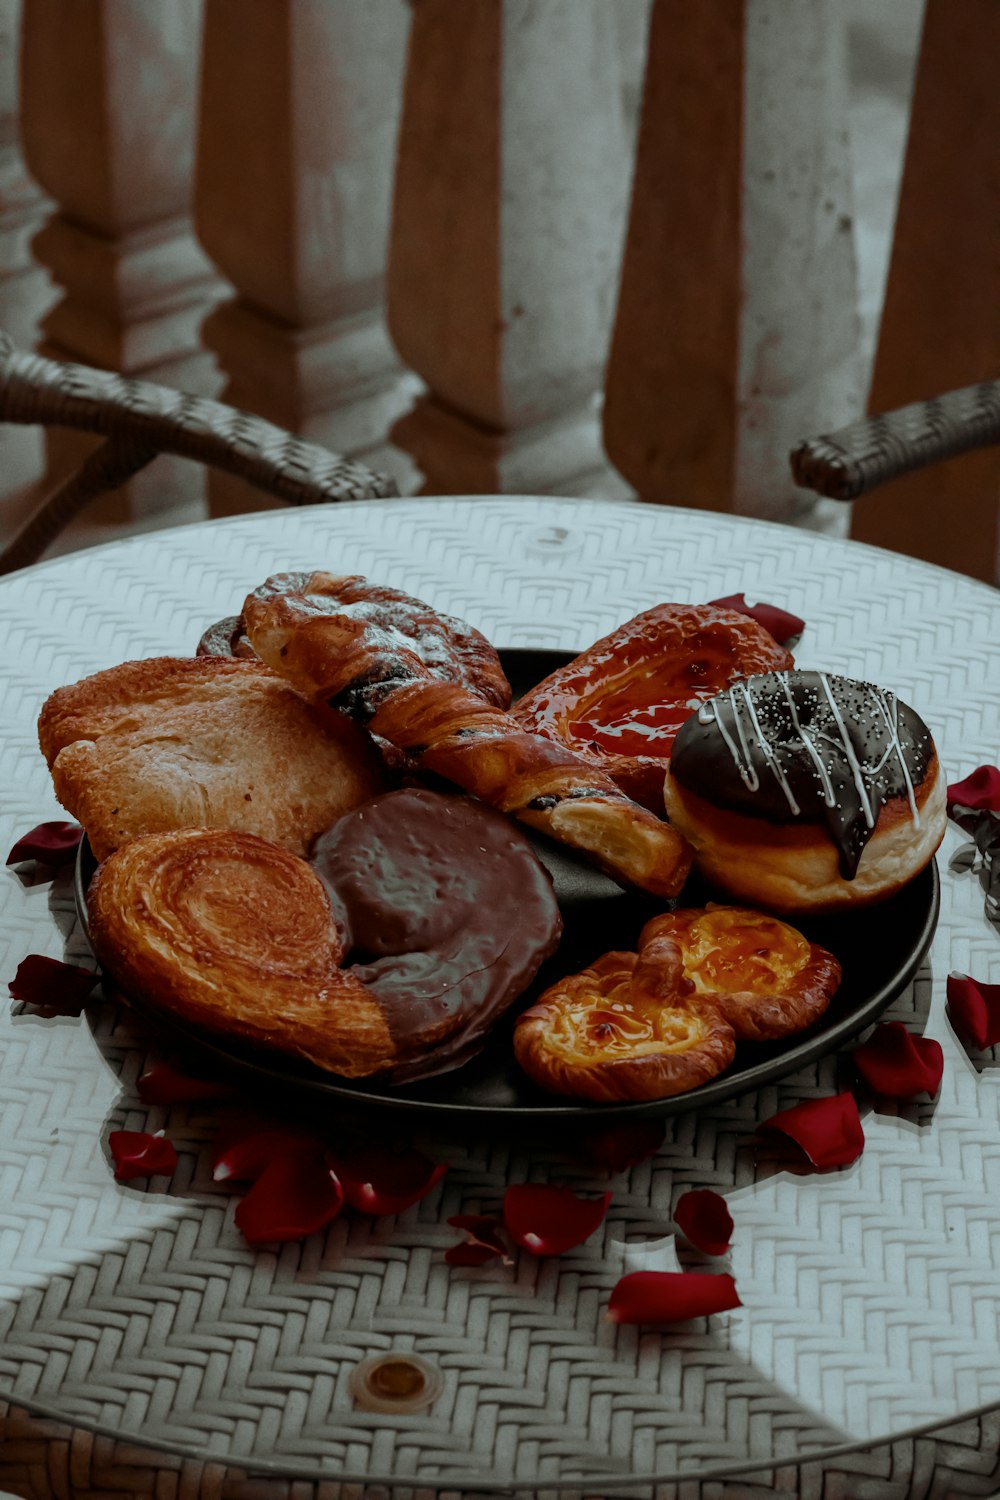 a plate of pastries and pastries on a table